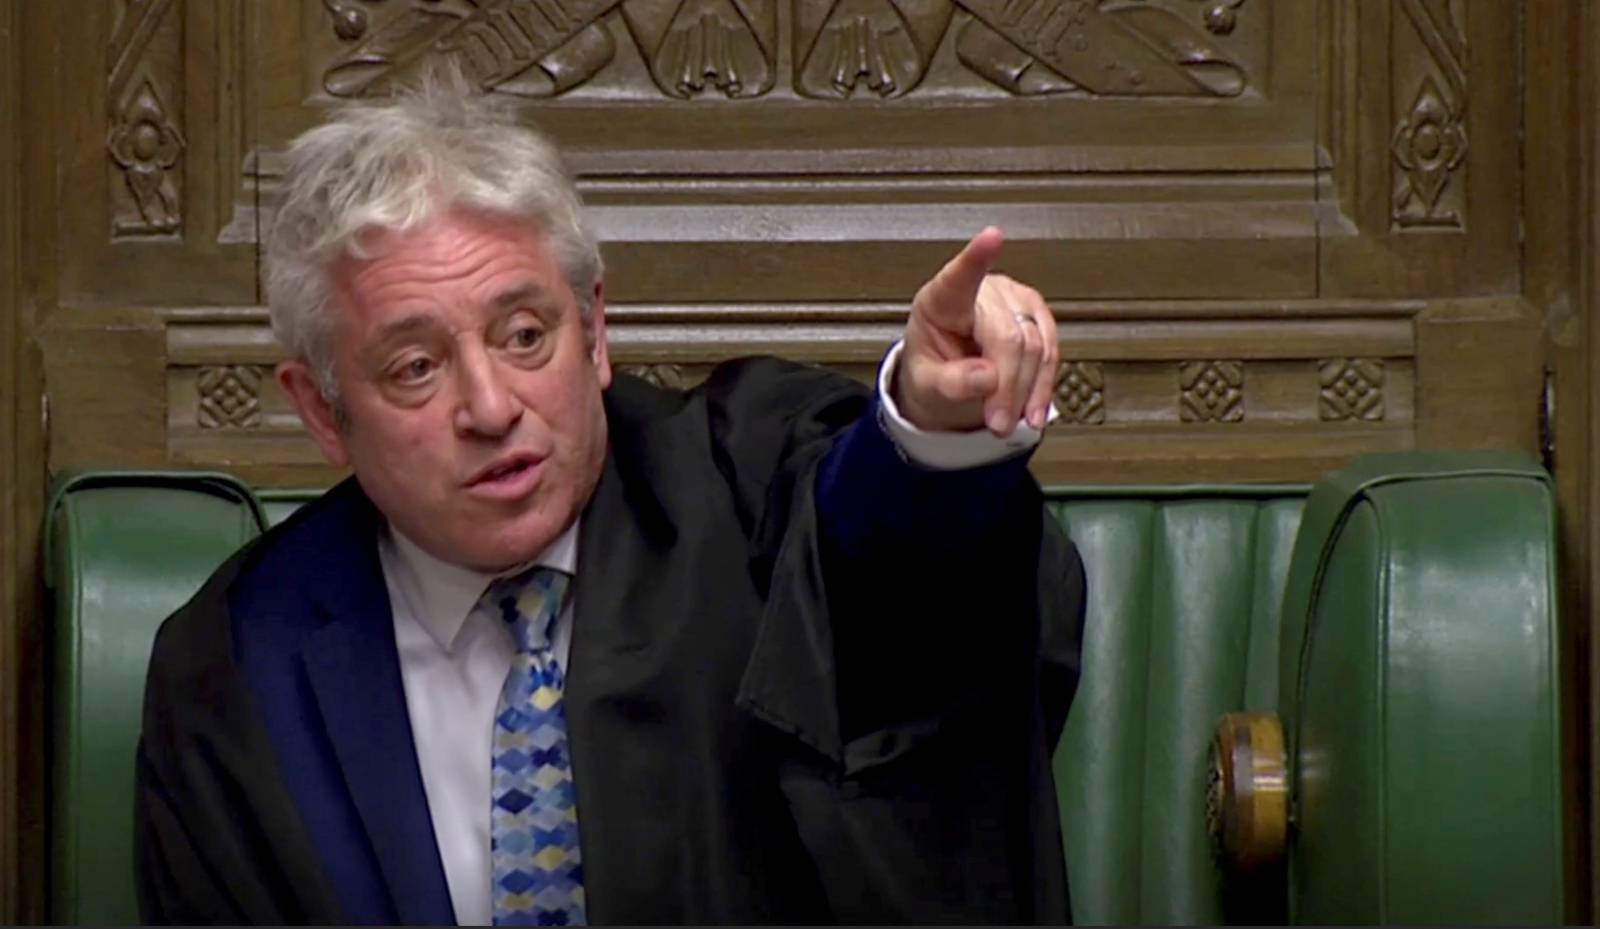 FILE PHOTO: Speaker of the House John Bercow gestures as he speaks after tellers announced the results of the vote Brexit deal in Parliament in London